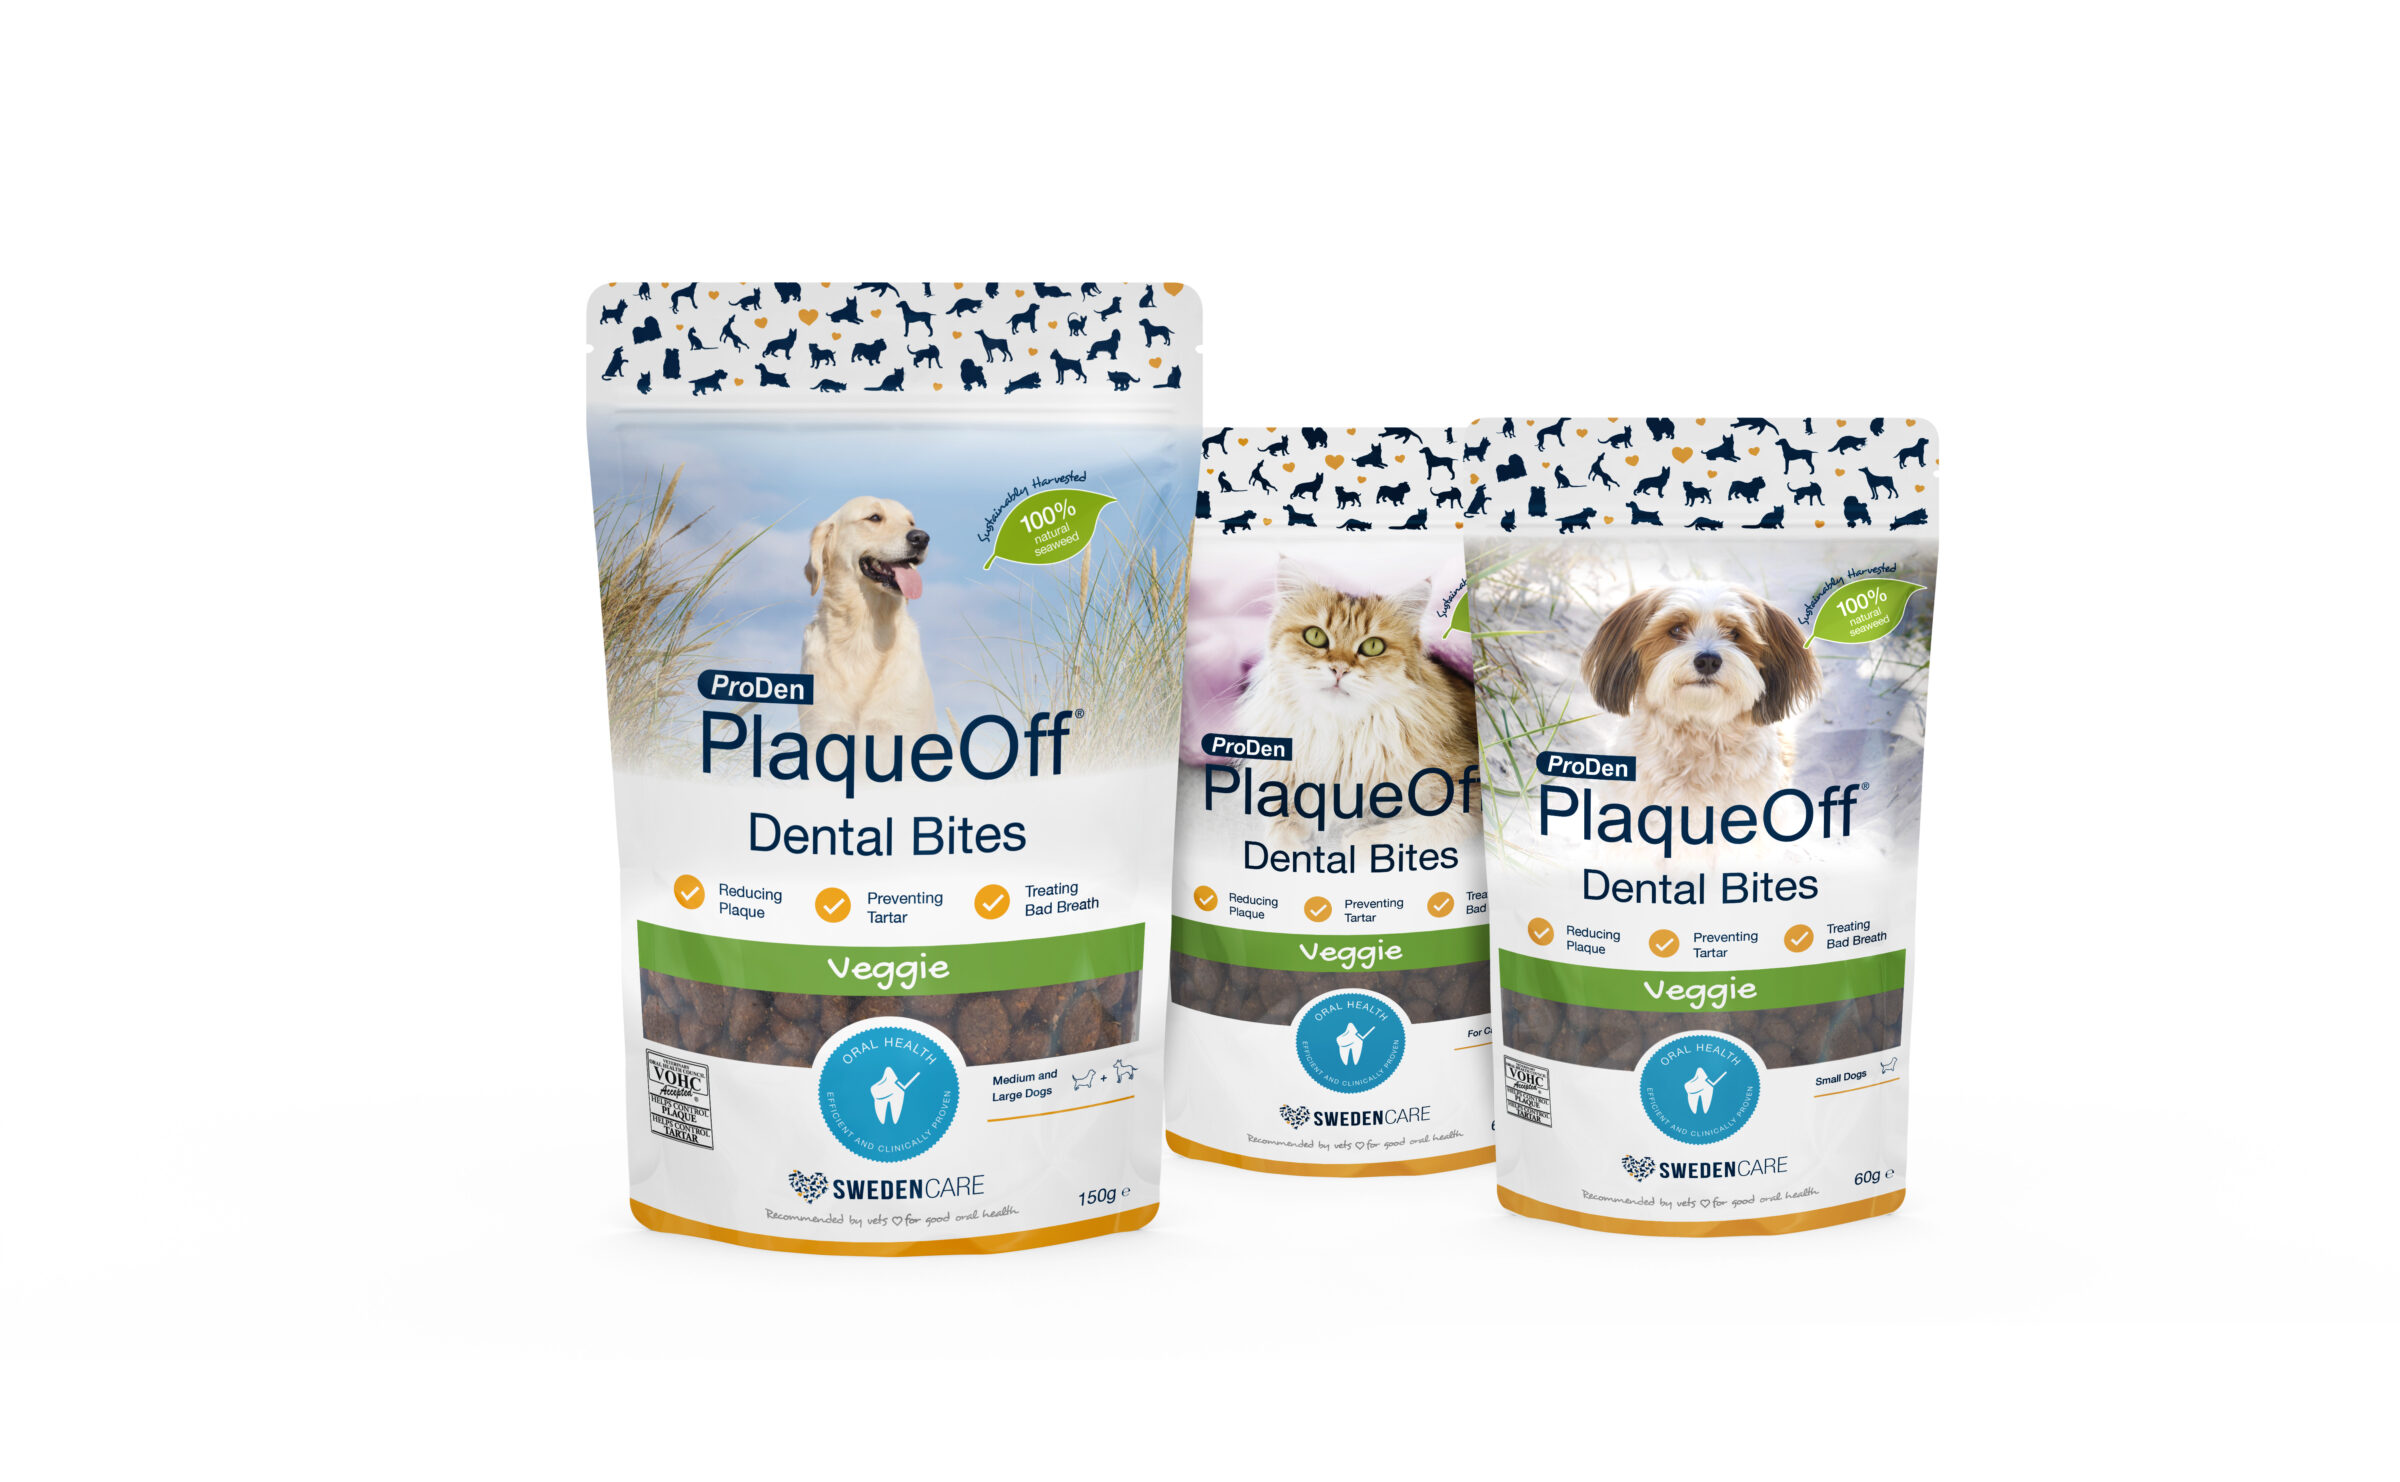 Swedencare proden plaqueoff new packaging design made by Adentity